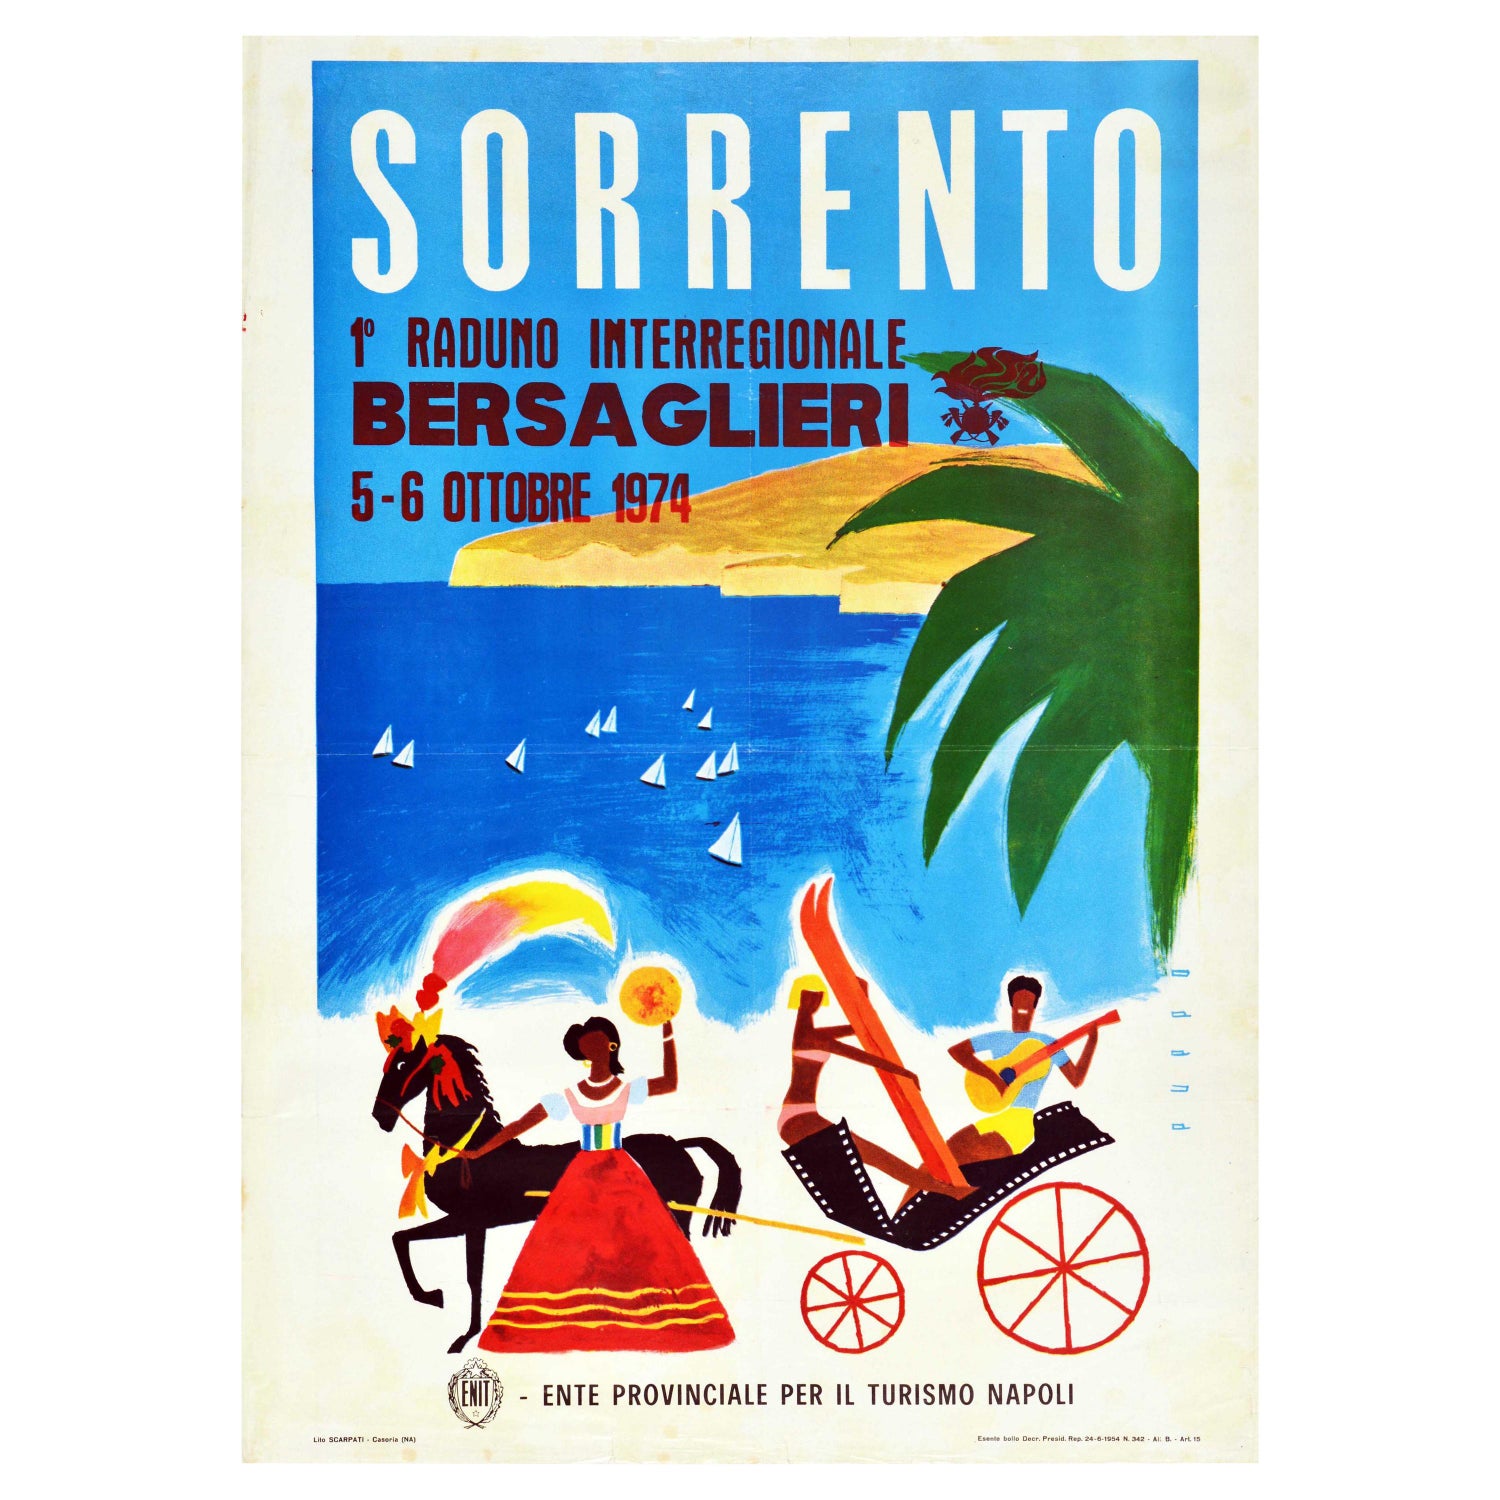 TV63 Vintage 1950's A4 Vicenza Italy Italian Travel Tourism Poster Re-Print